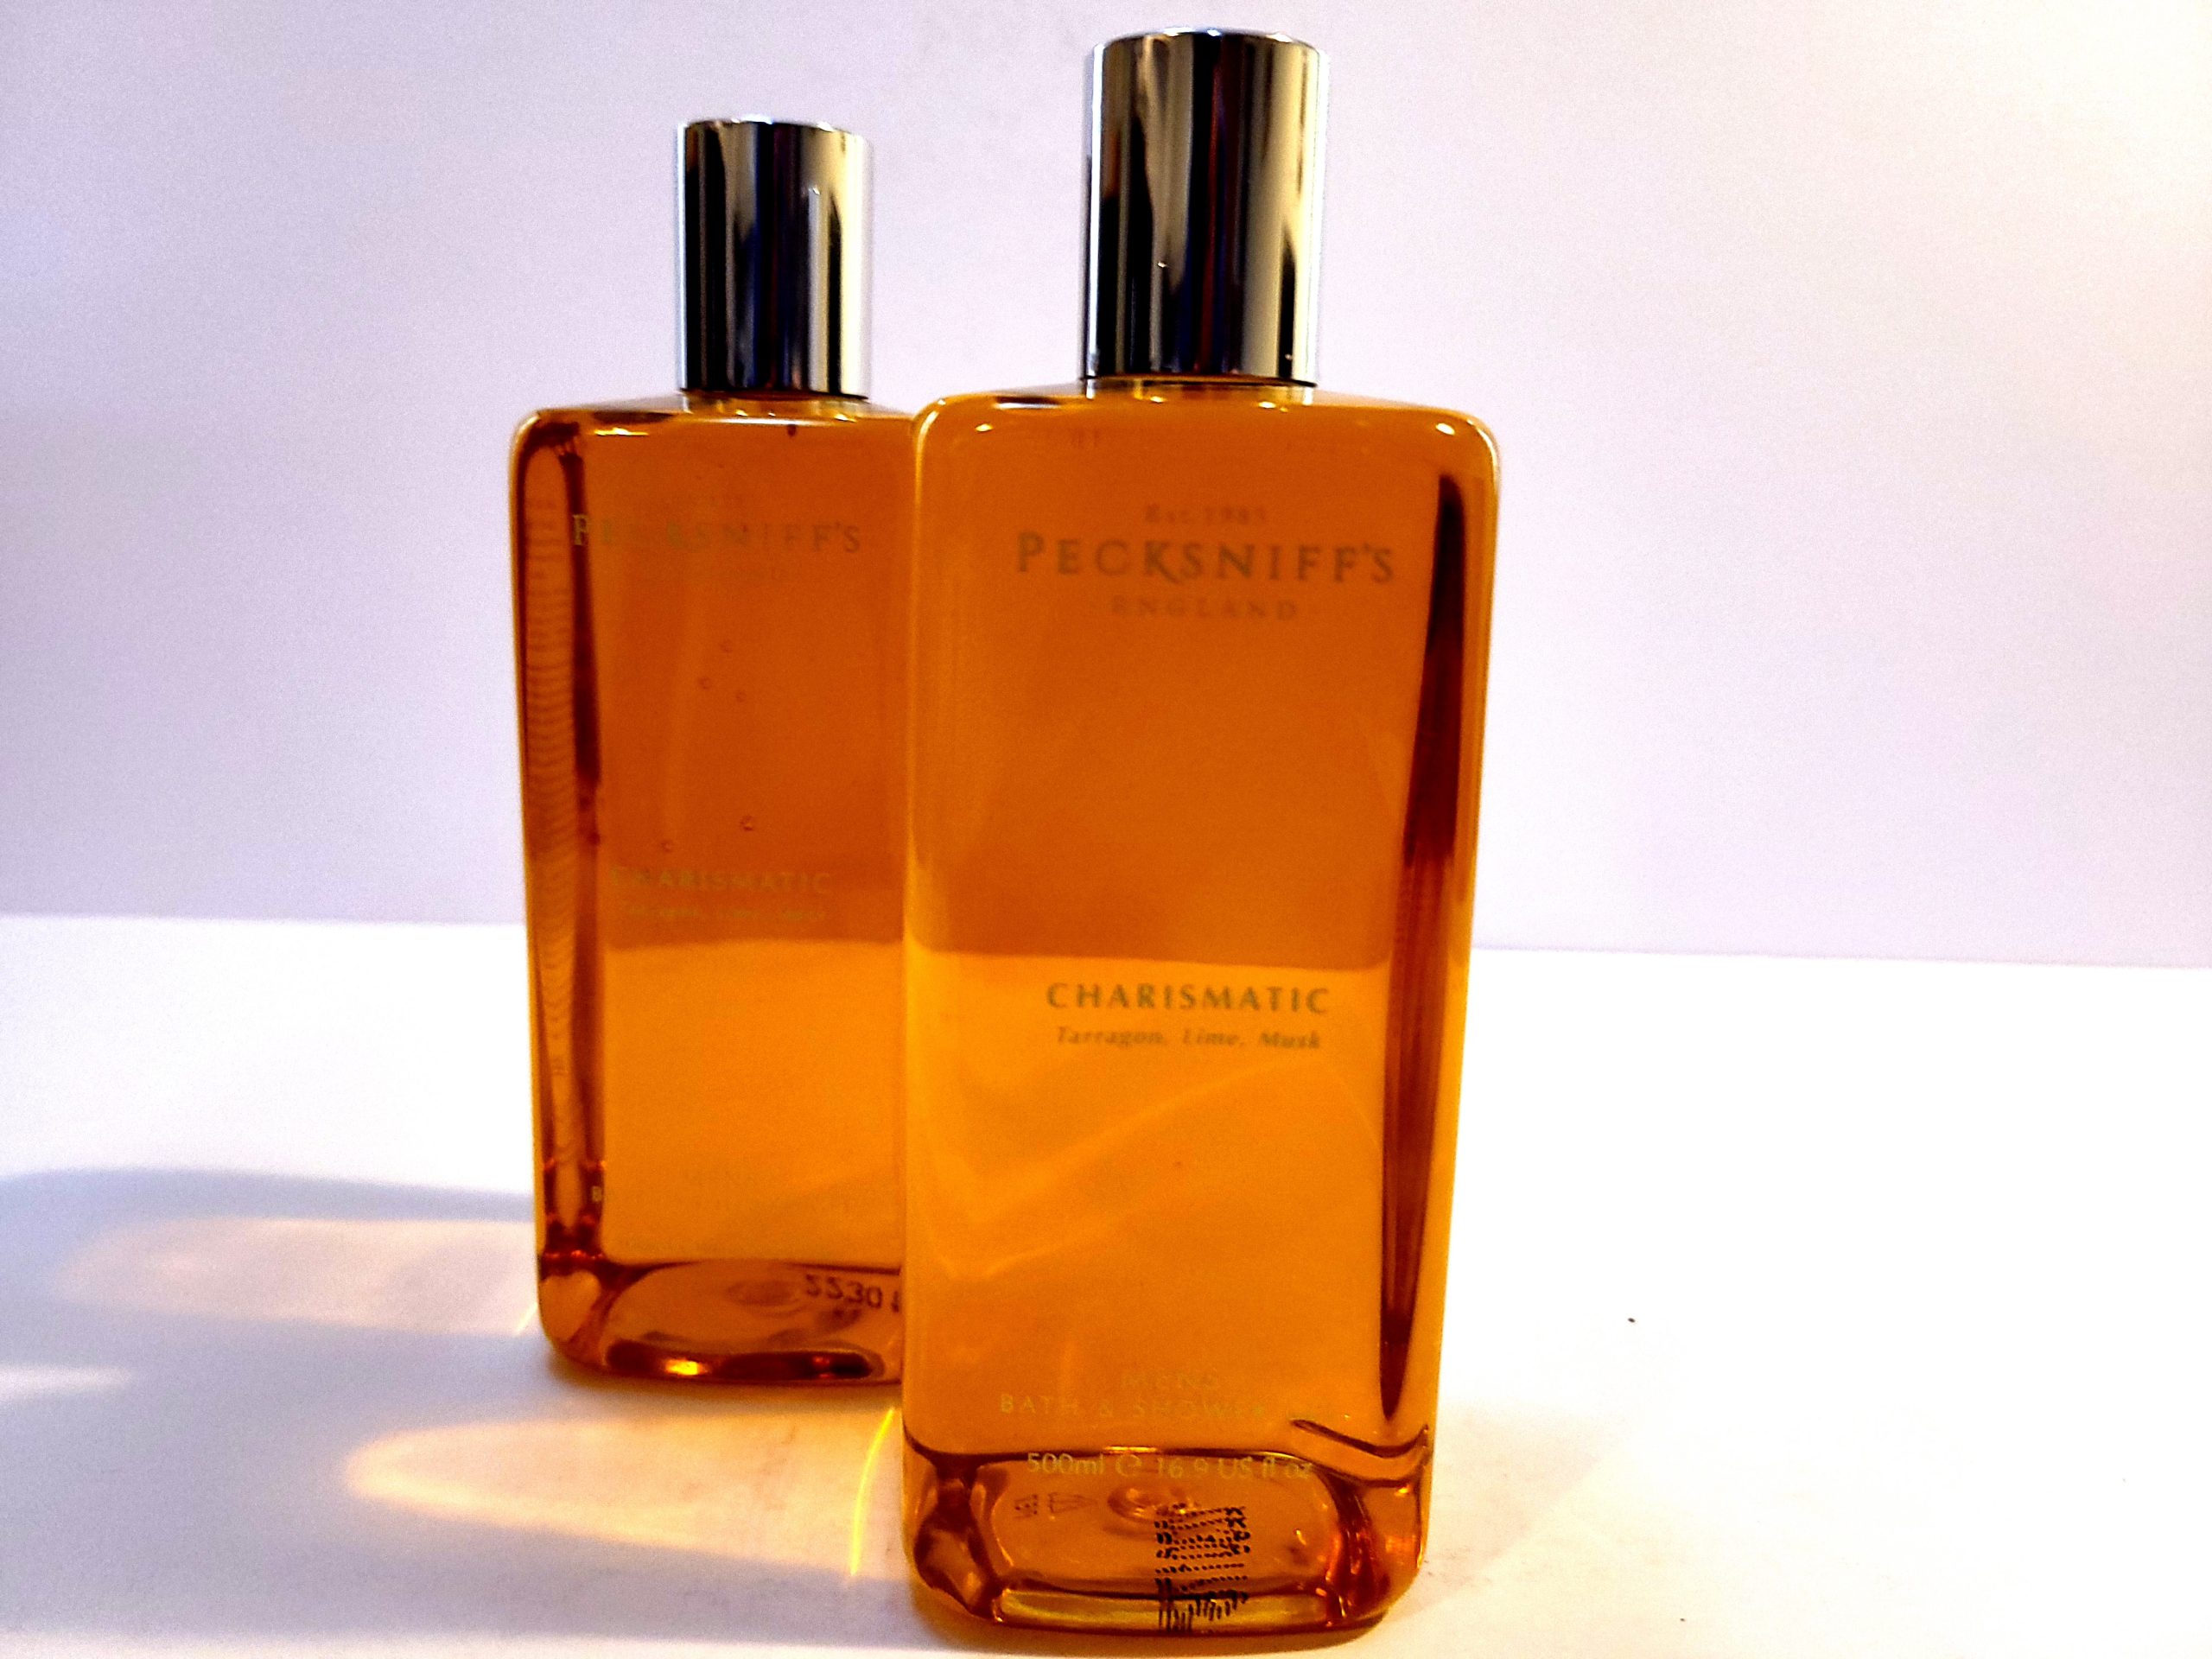 Two bottles of Pecksniffs Charismatic Mens Bath & Shower Gel, 500ml sitting on a white surface.